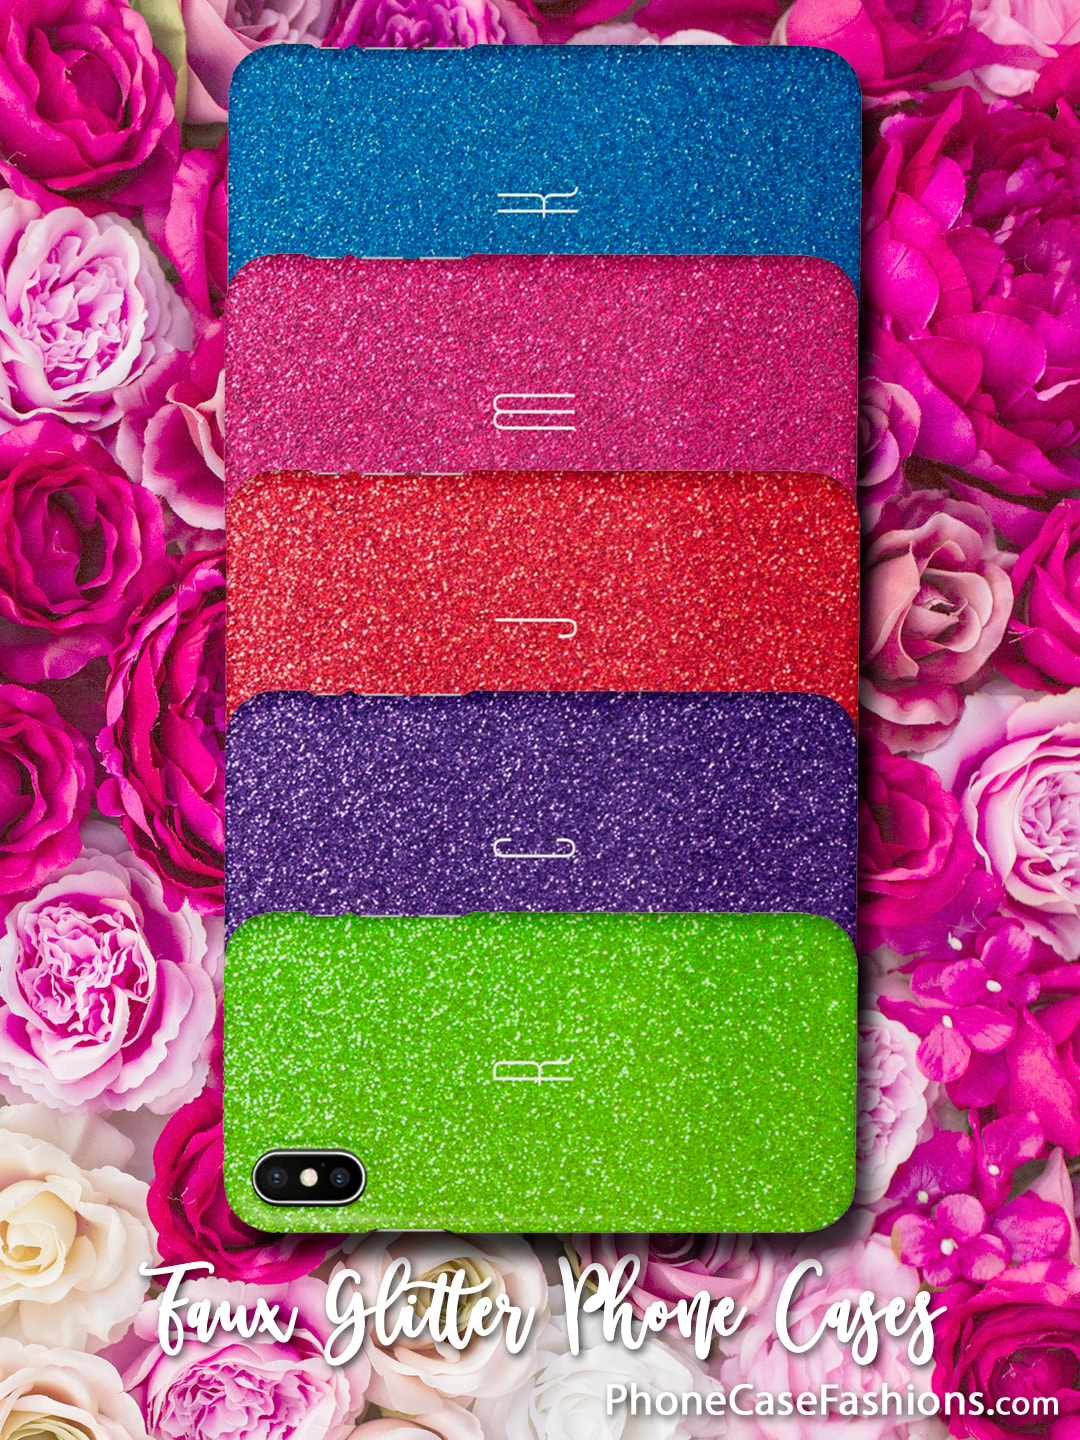 Love sparkle? Faux glitter phone cases in lots of colors, personalize with your initial, monogram, name or leave plain. Collect them all to match your favorite clothes, fingernail polish or your mood. Shop PhoneCaseFashions.com